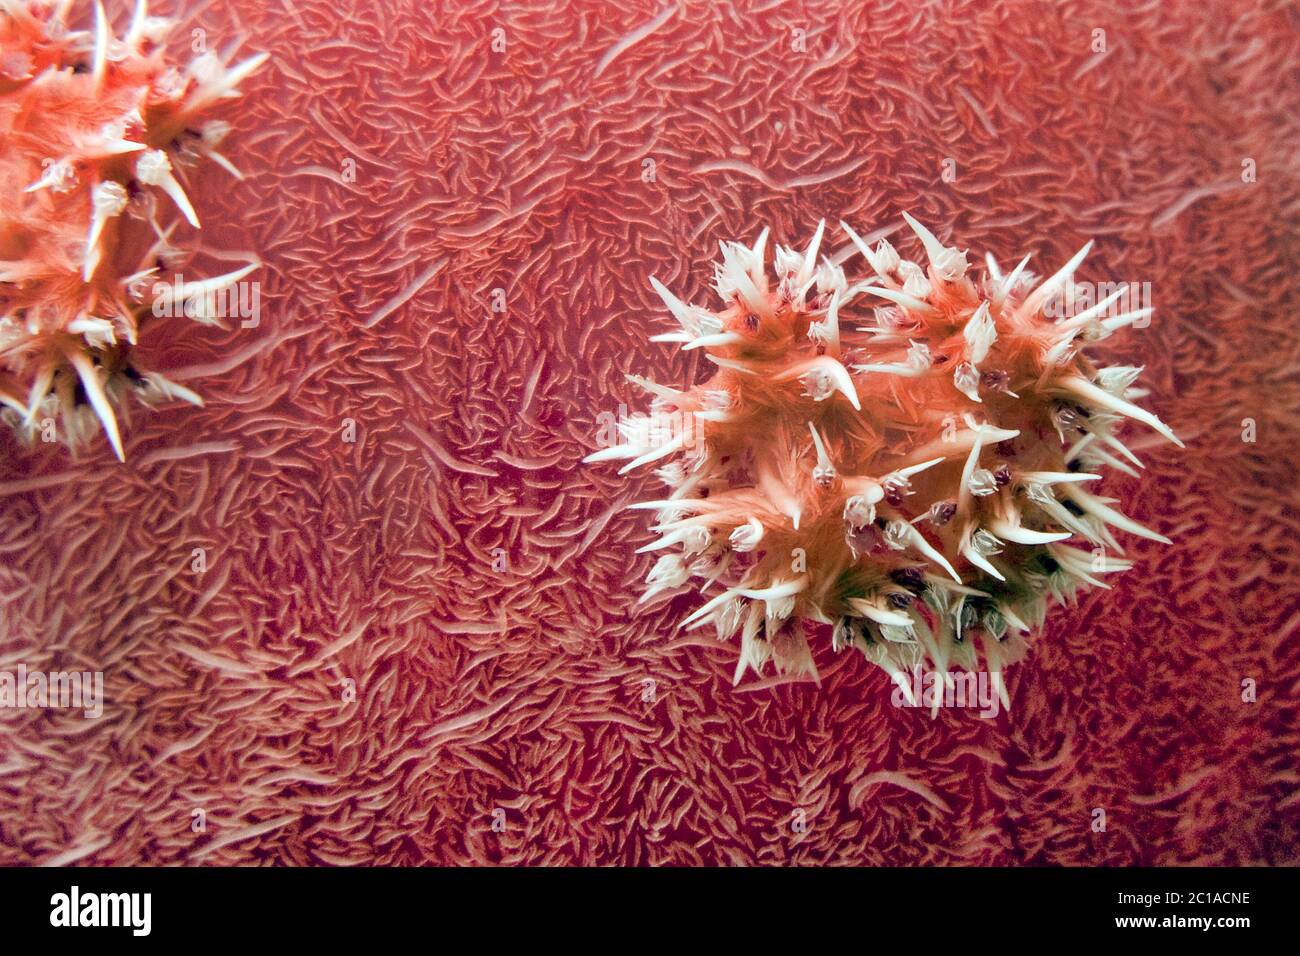 Thistle soft coral - Dendronephthya sp. Stock Photo